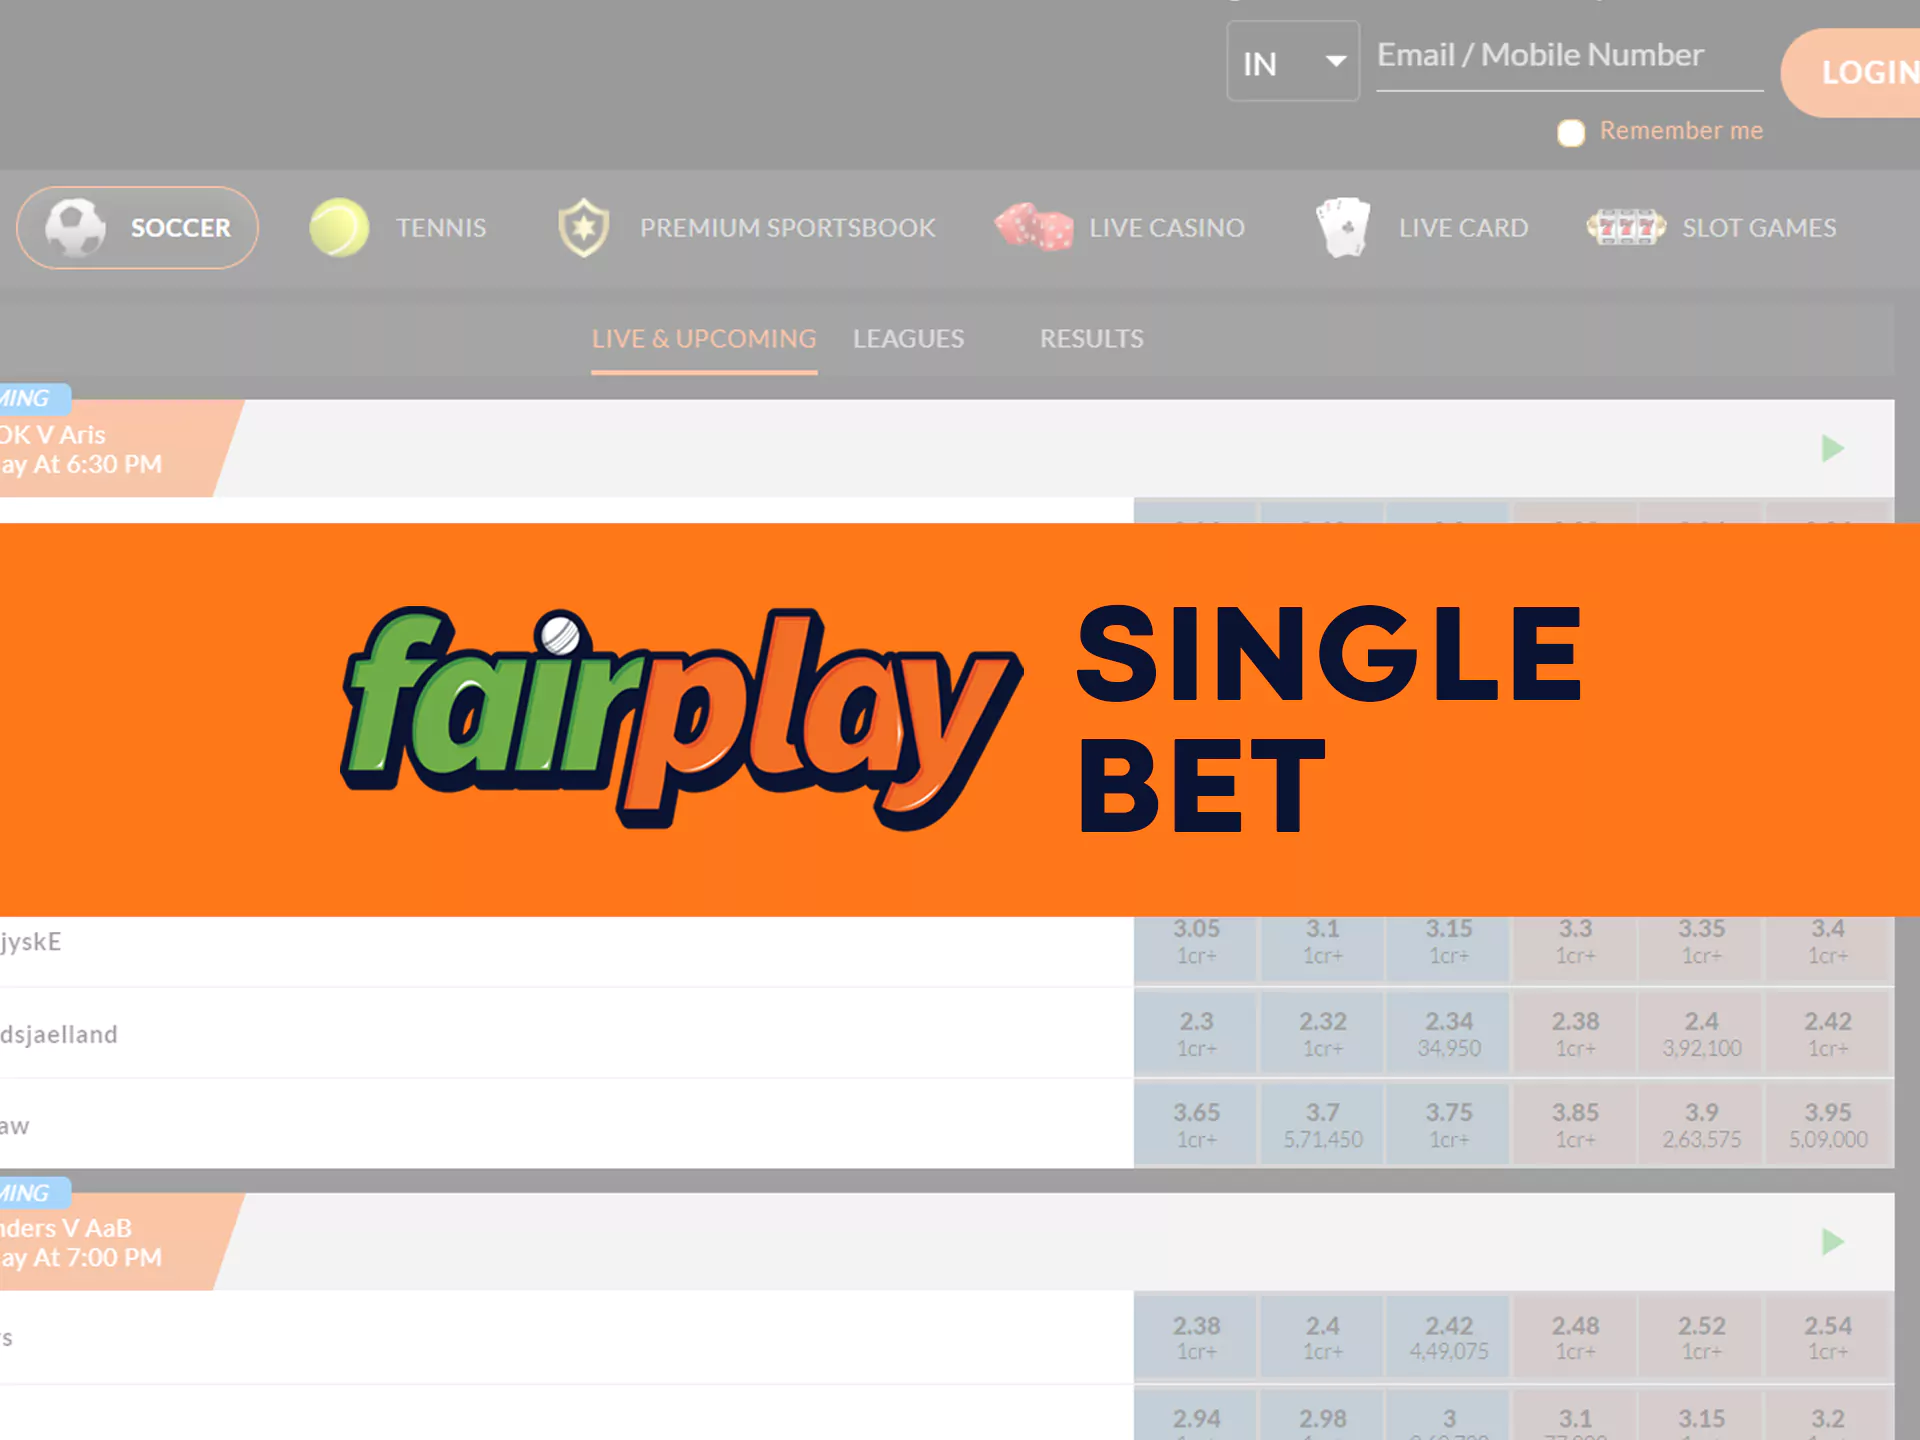 Win with single bet at Fairplay online.